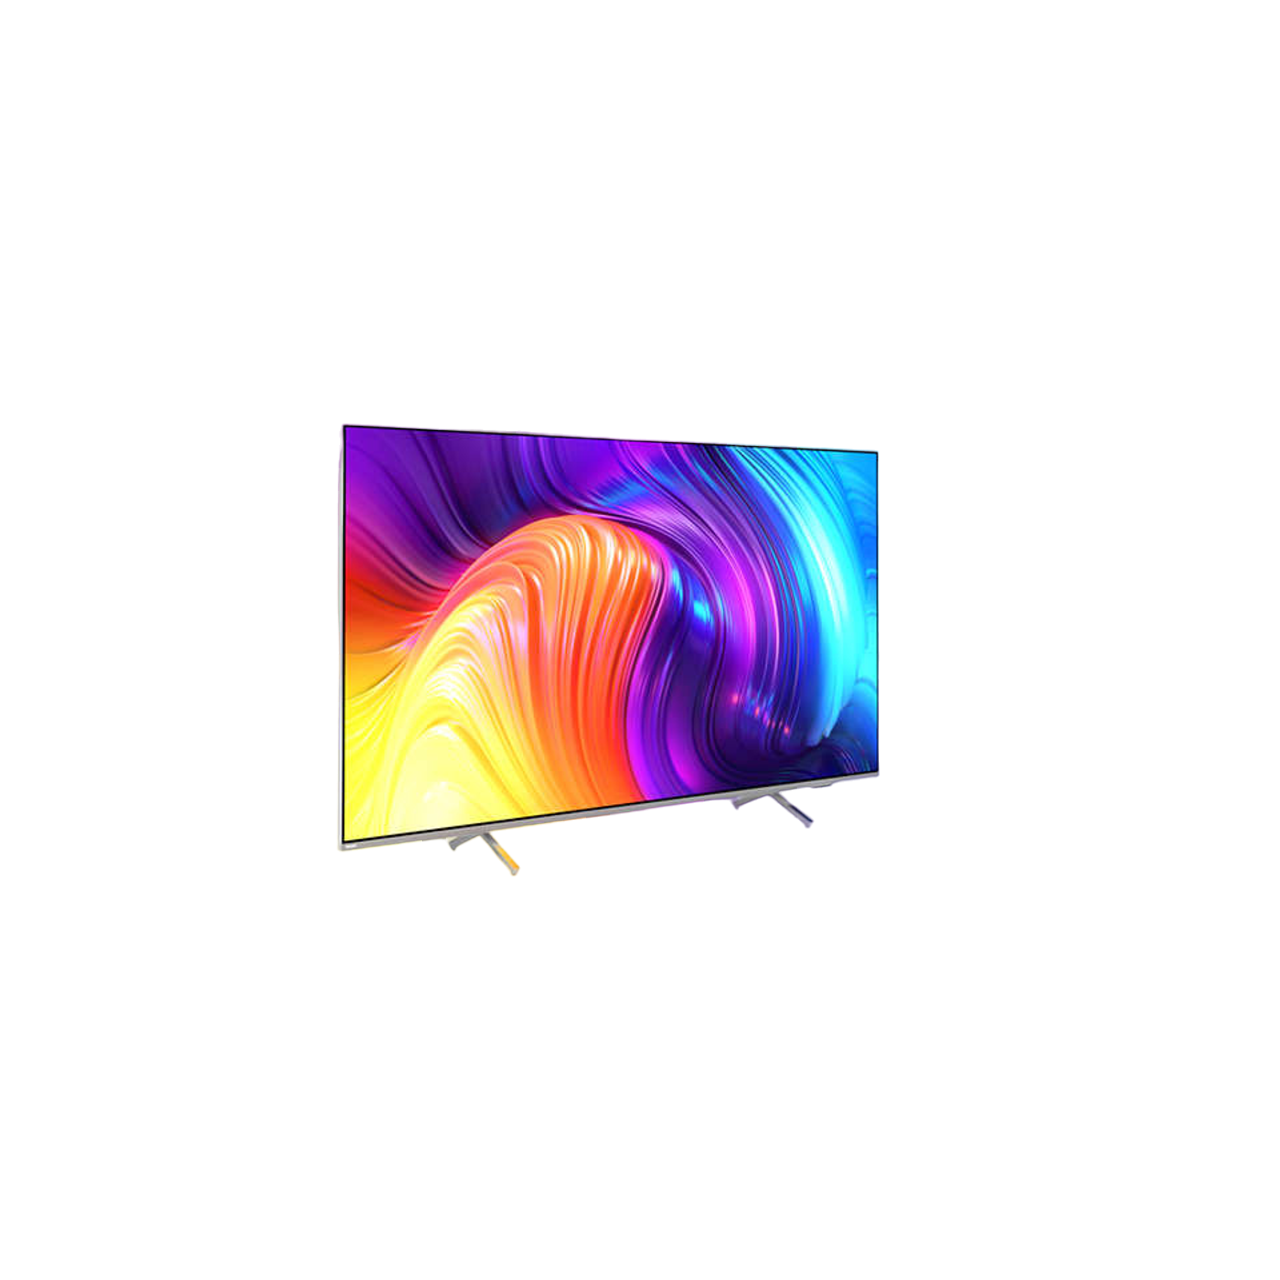 PHILIPS 43 PUS 8507/12 LED TV / 109,22 (R)) Zoll Android Ambilight, (Flat, UHD 11 cm, TV™ 4K, 43